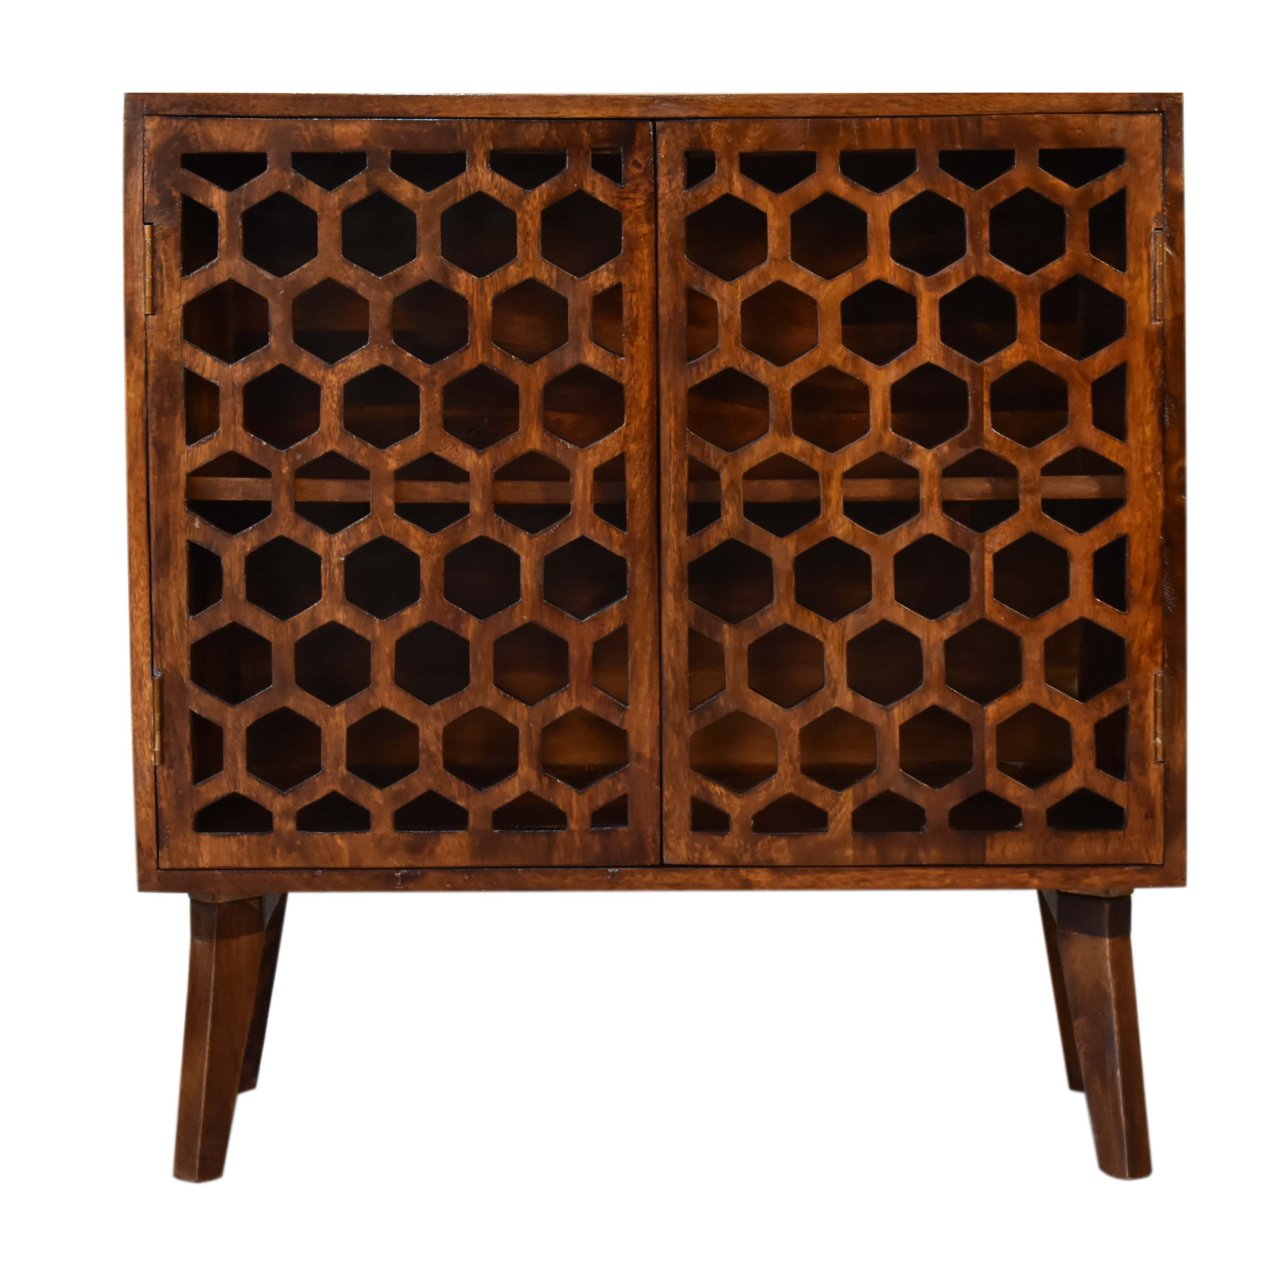 View Chestnut Comb Cabinet information